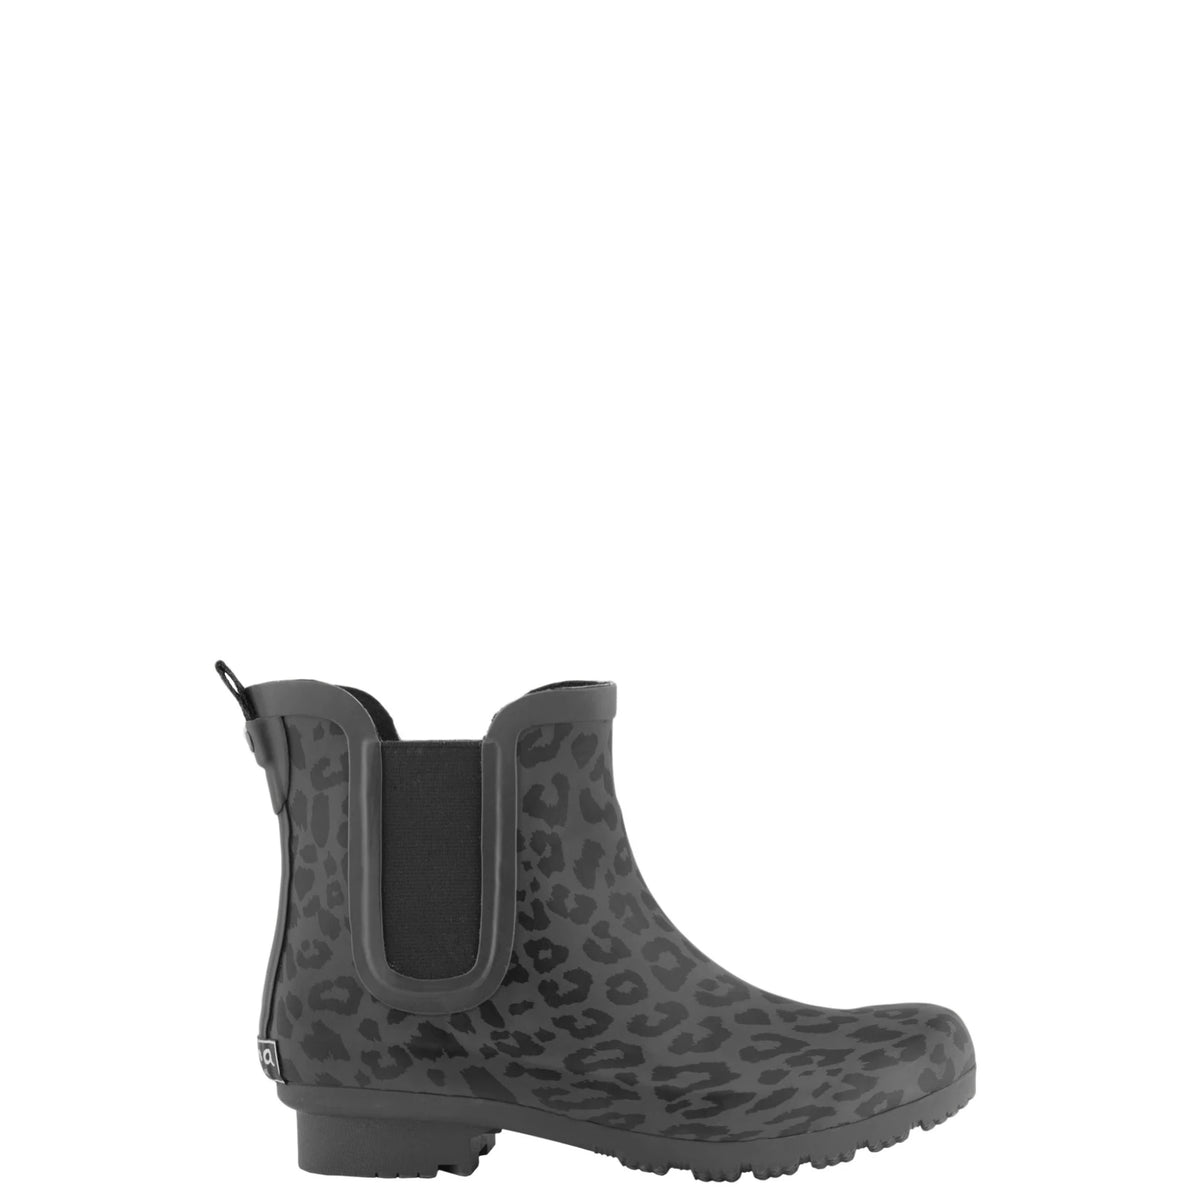 Black cheetah print Ankle Rain Boots - By Roma Boots - SLATE Boutique & Gifts